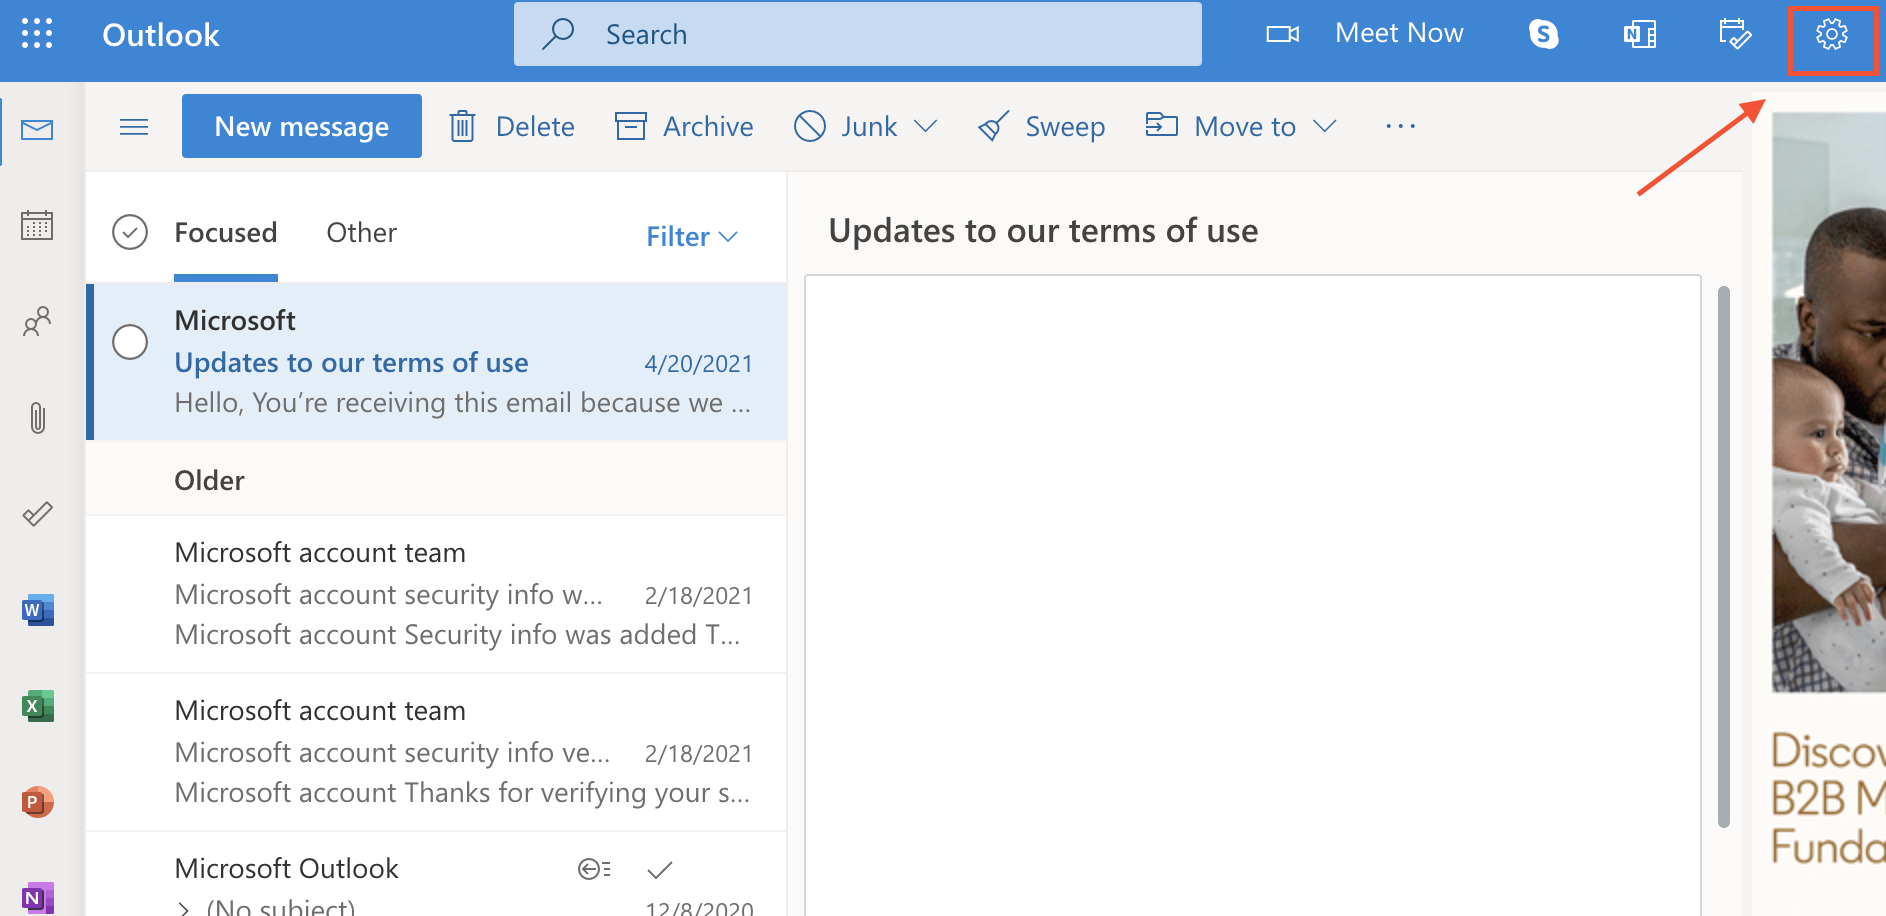 Outlook incoming emails into specific folders automatically settings